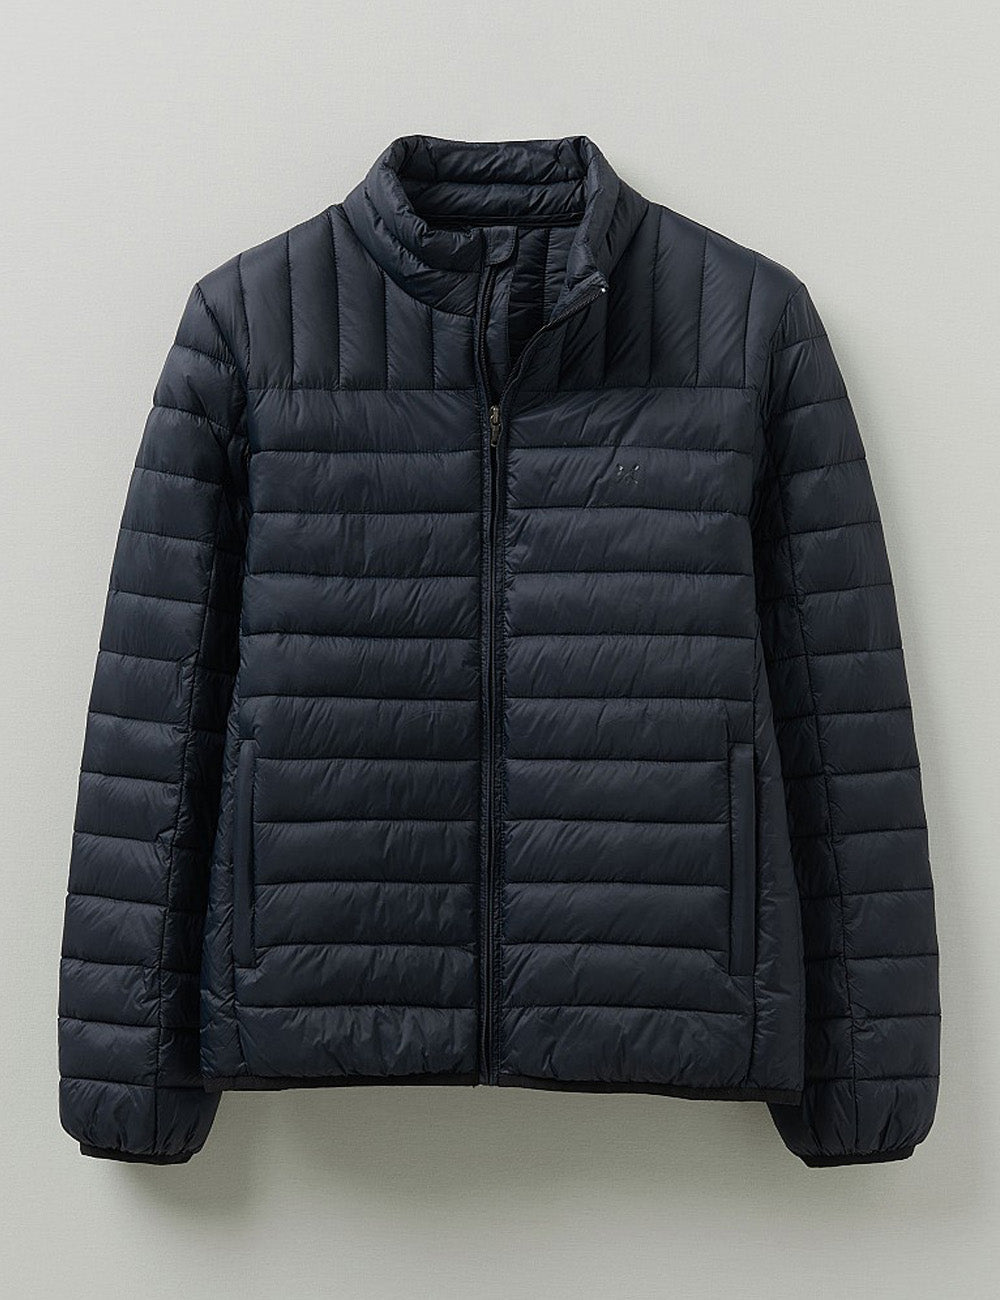 Crew Clothing Lowther Jacket - Black